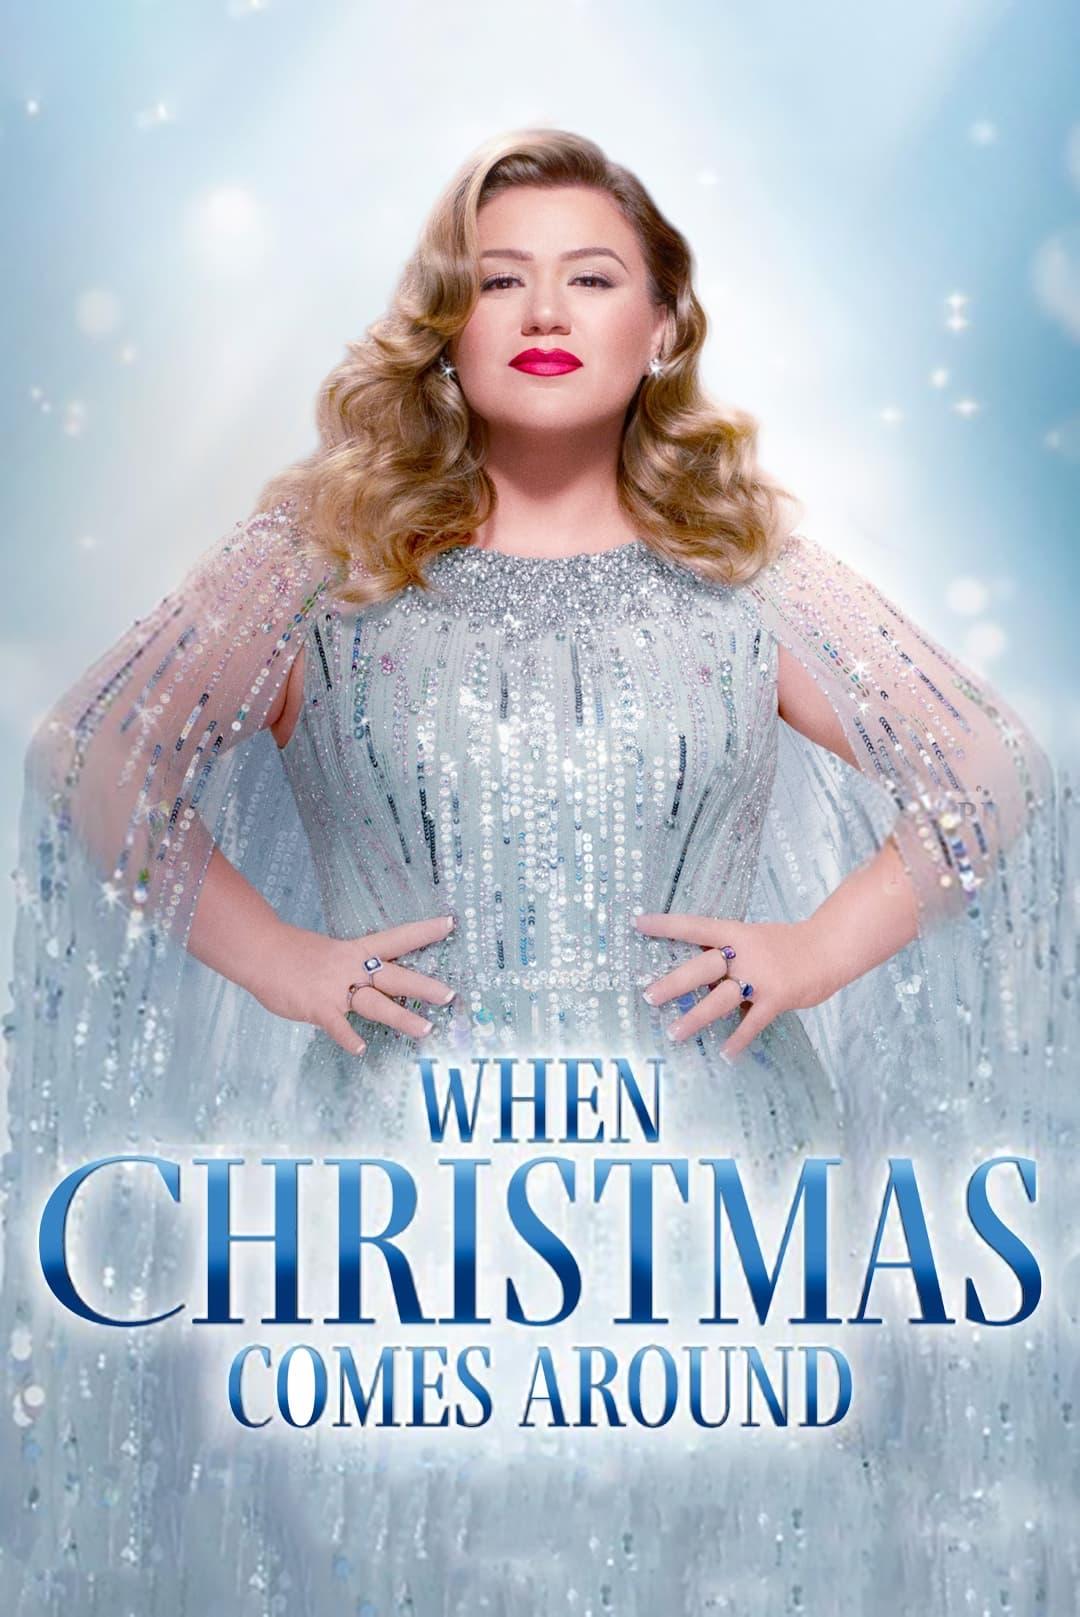 Kelly Clarkson Presents: When Christmas Comes Around poster